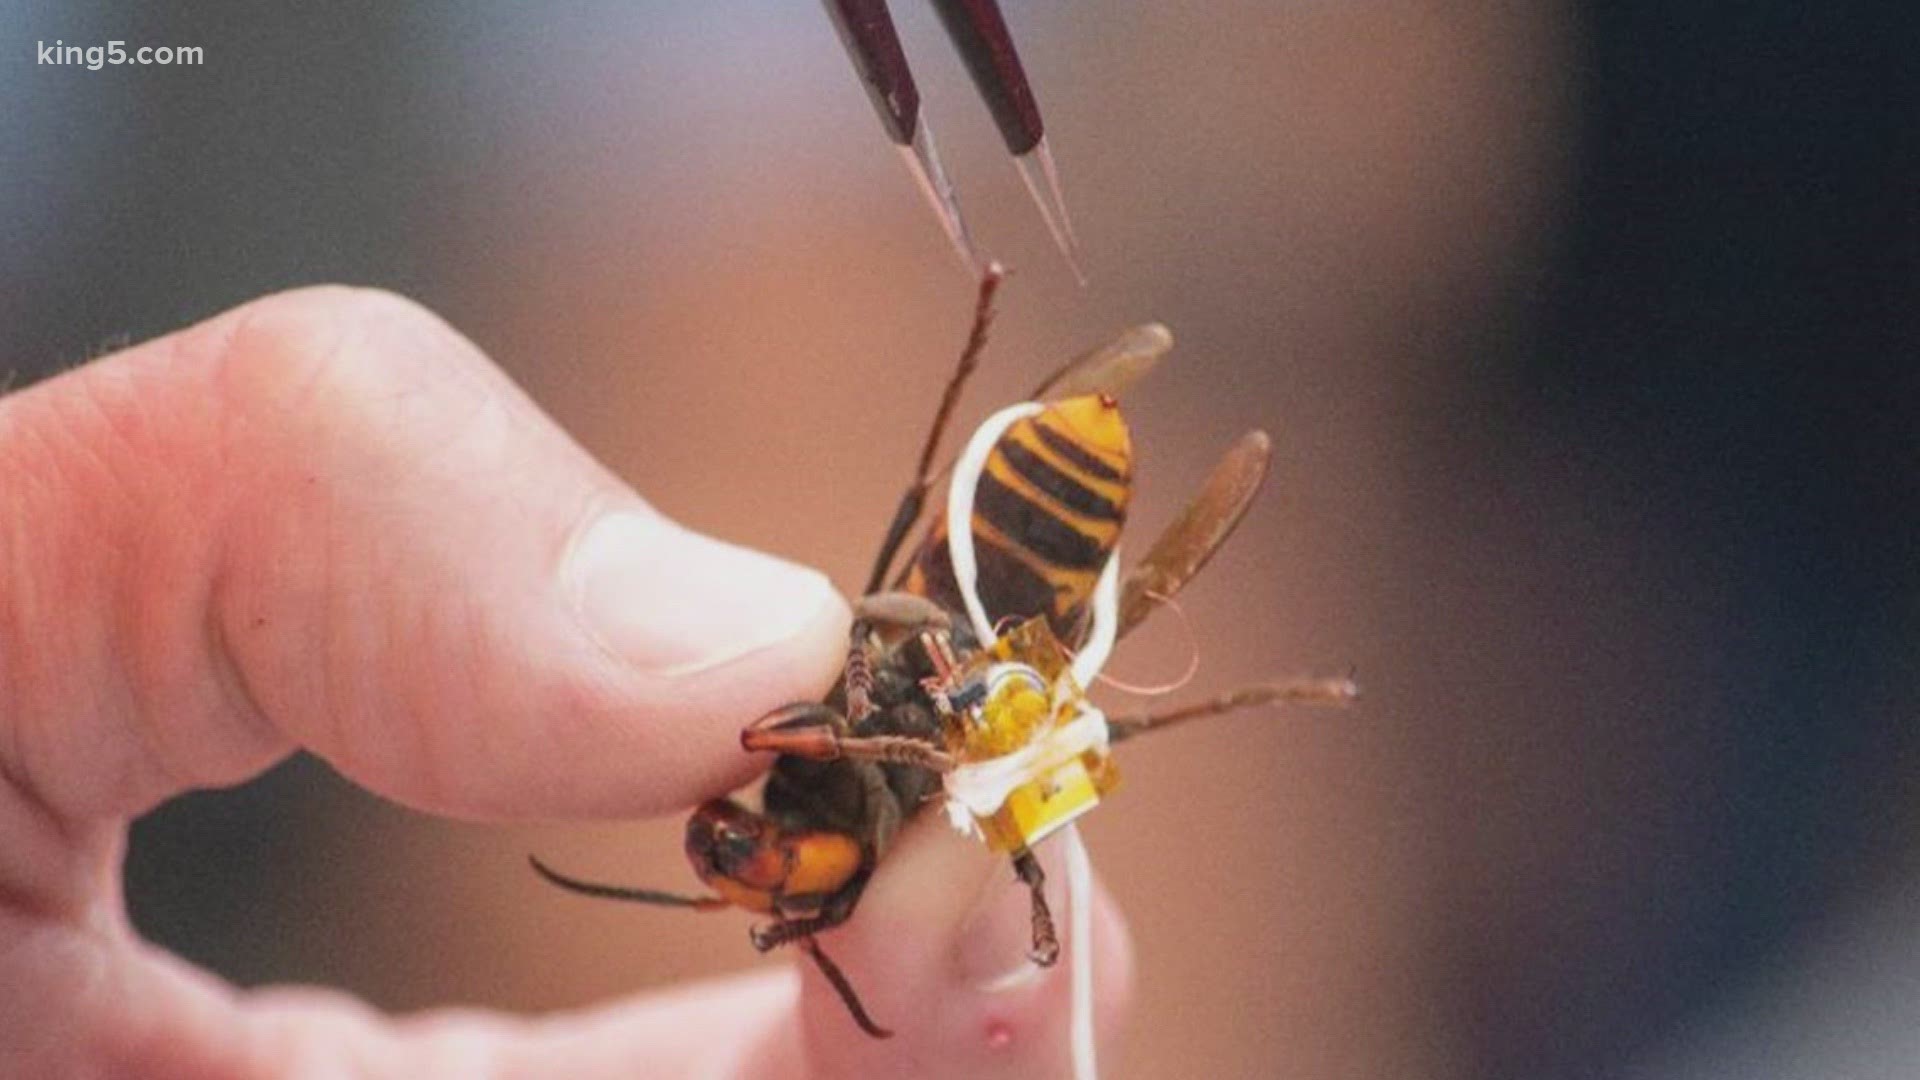 Dental floss was used to secure a small Bluetooth device to a second Asian giant hornet found alive in an effort to locate the nest.